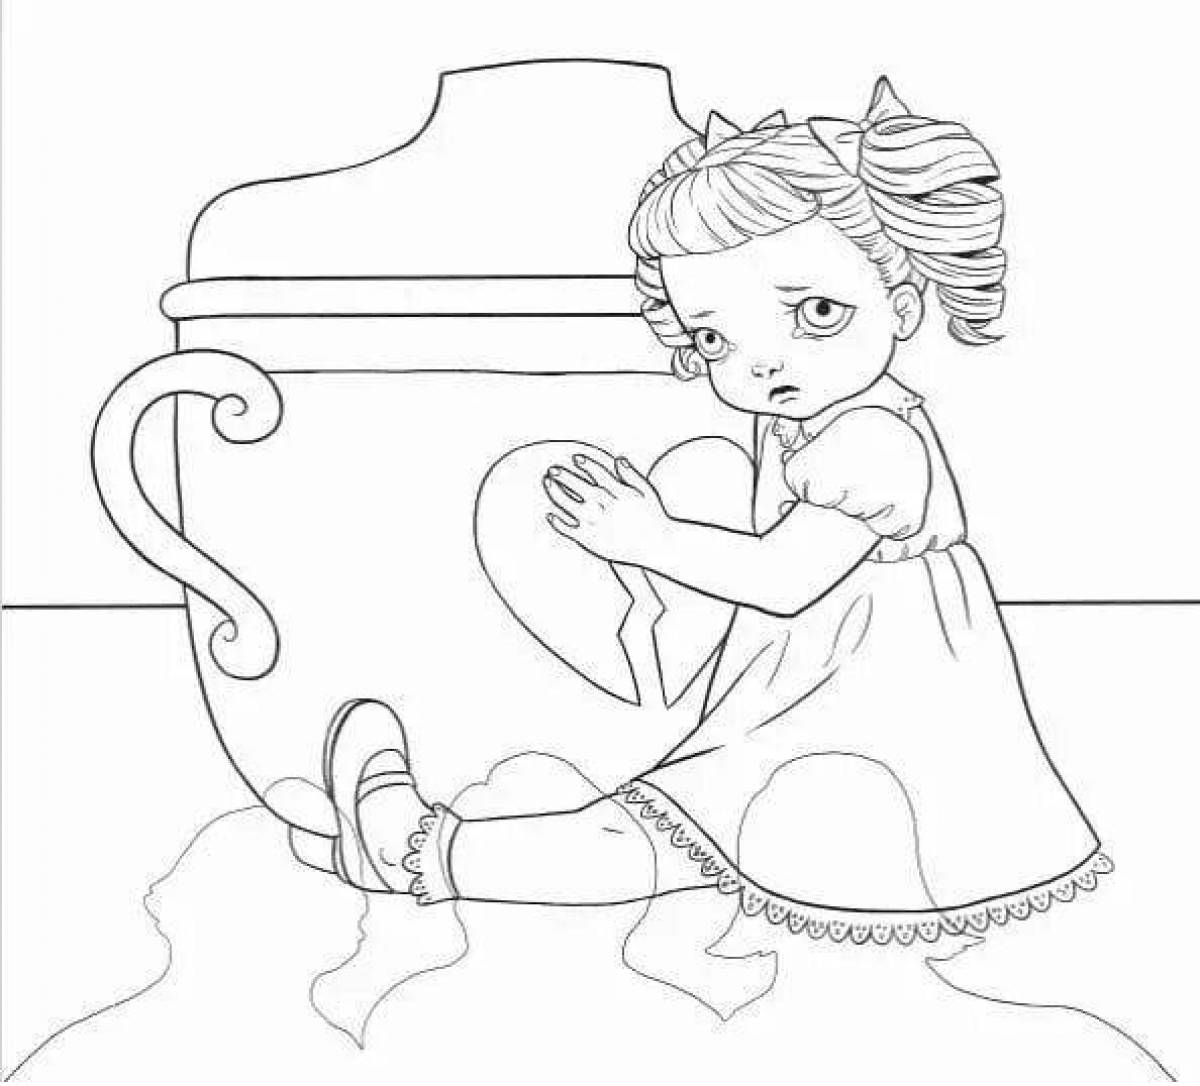 Crybaby adorable coloring page